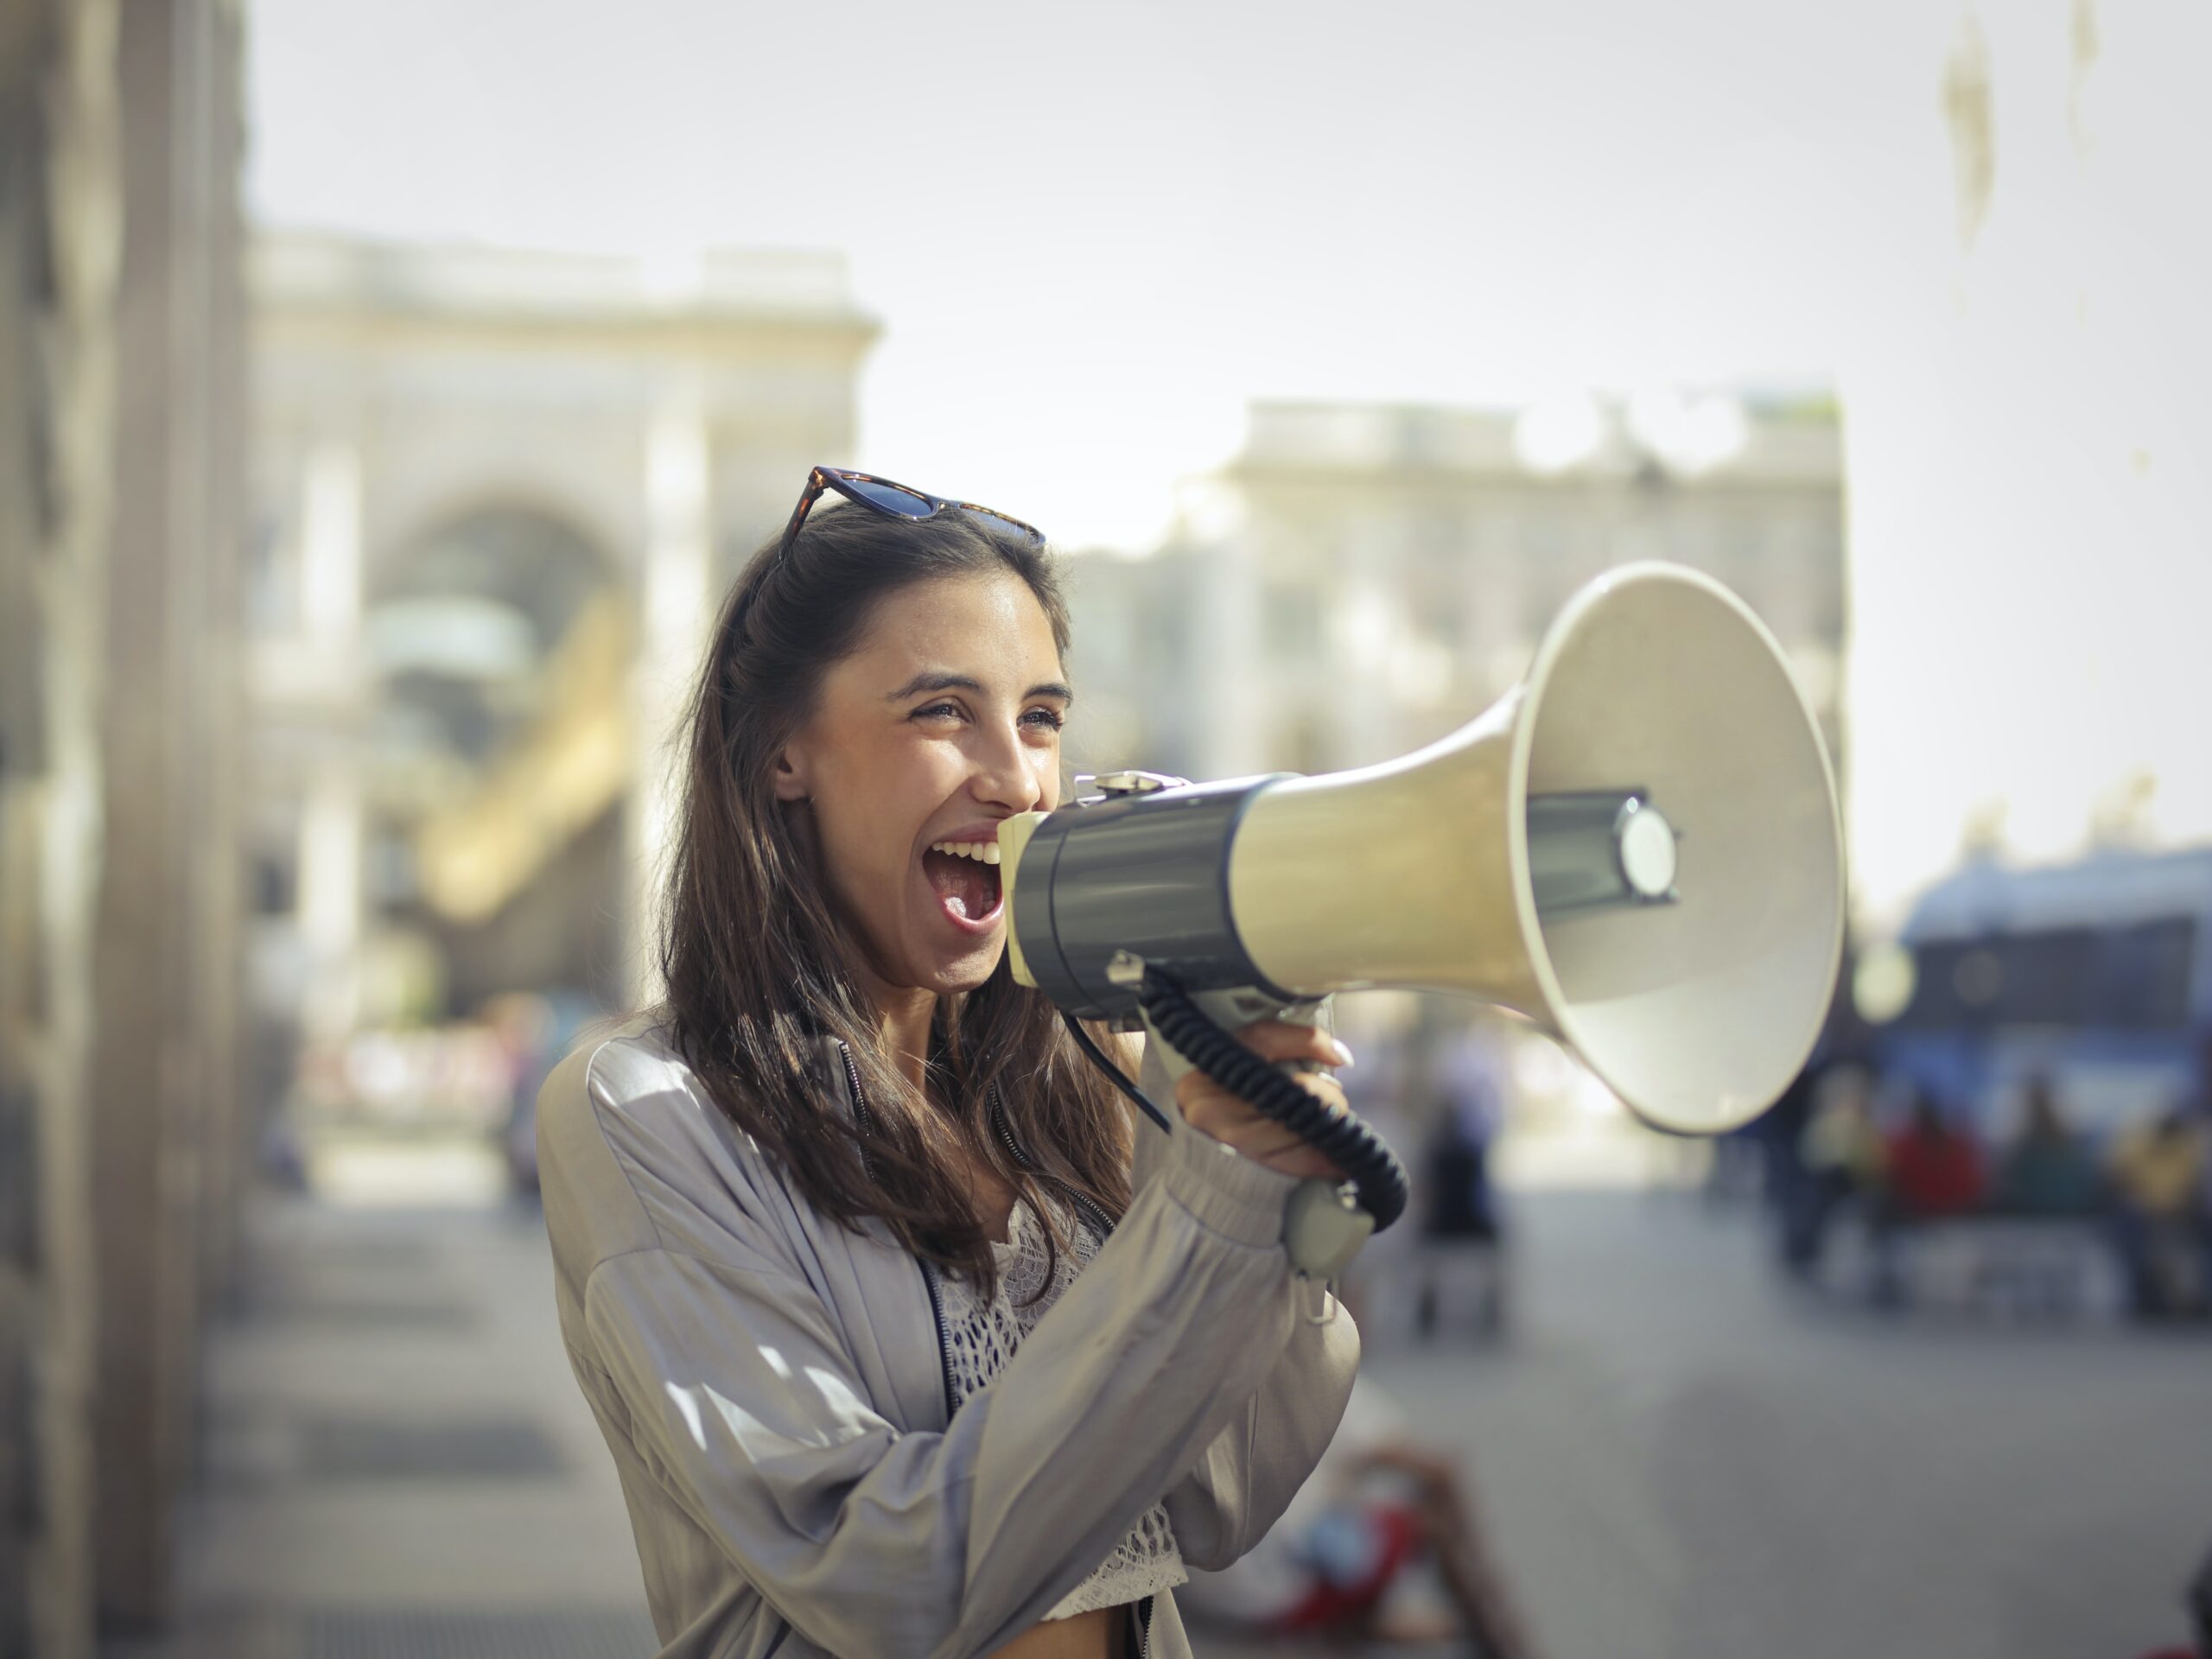 A young, dark-haired woman shouting into a megaphone